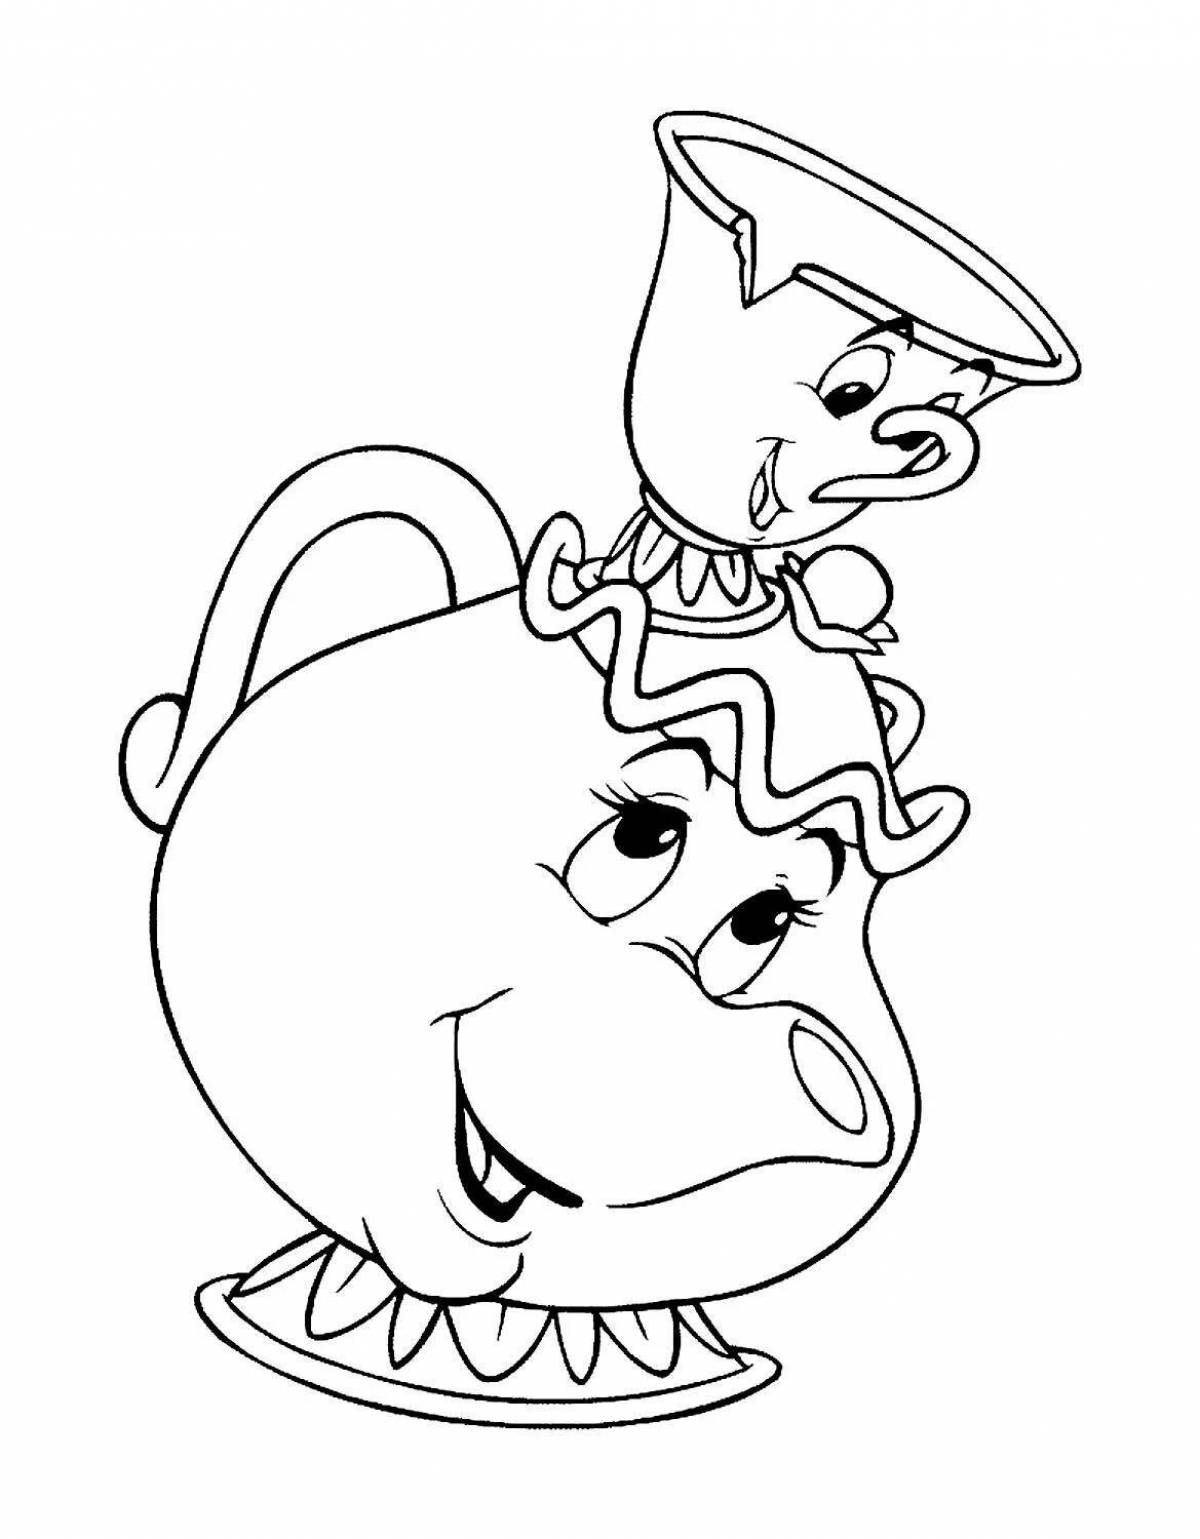 Rampant beauty and the beast coloring pages for kids